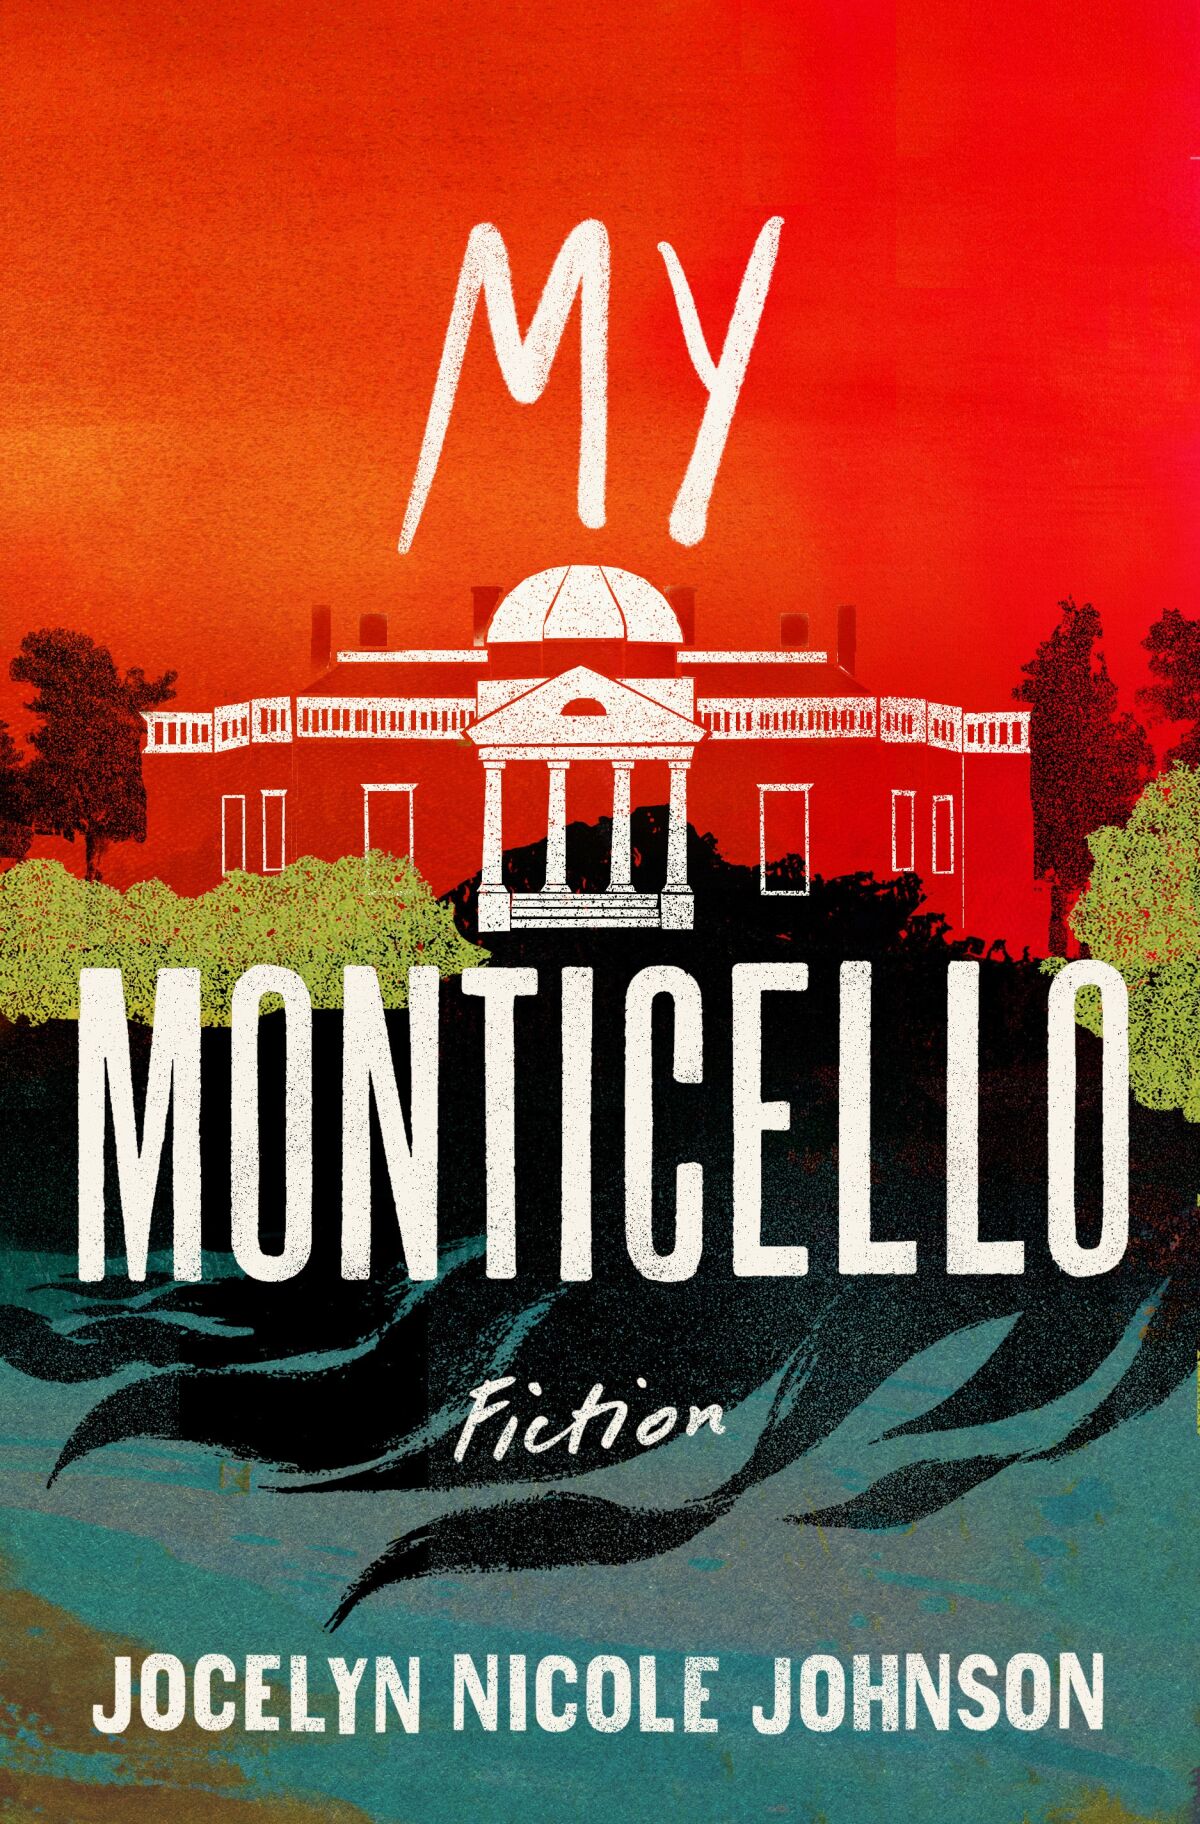 The cover of "My Monticello," a collection of short stories by Jocelyn Nicole Johnson.